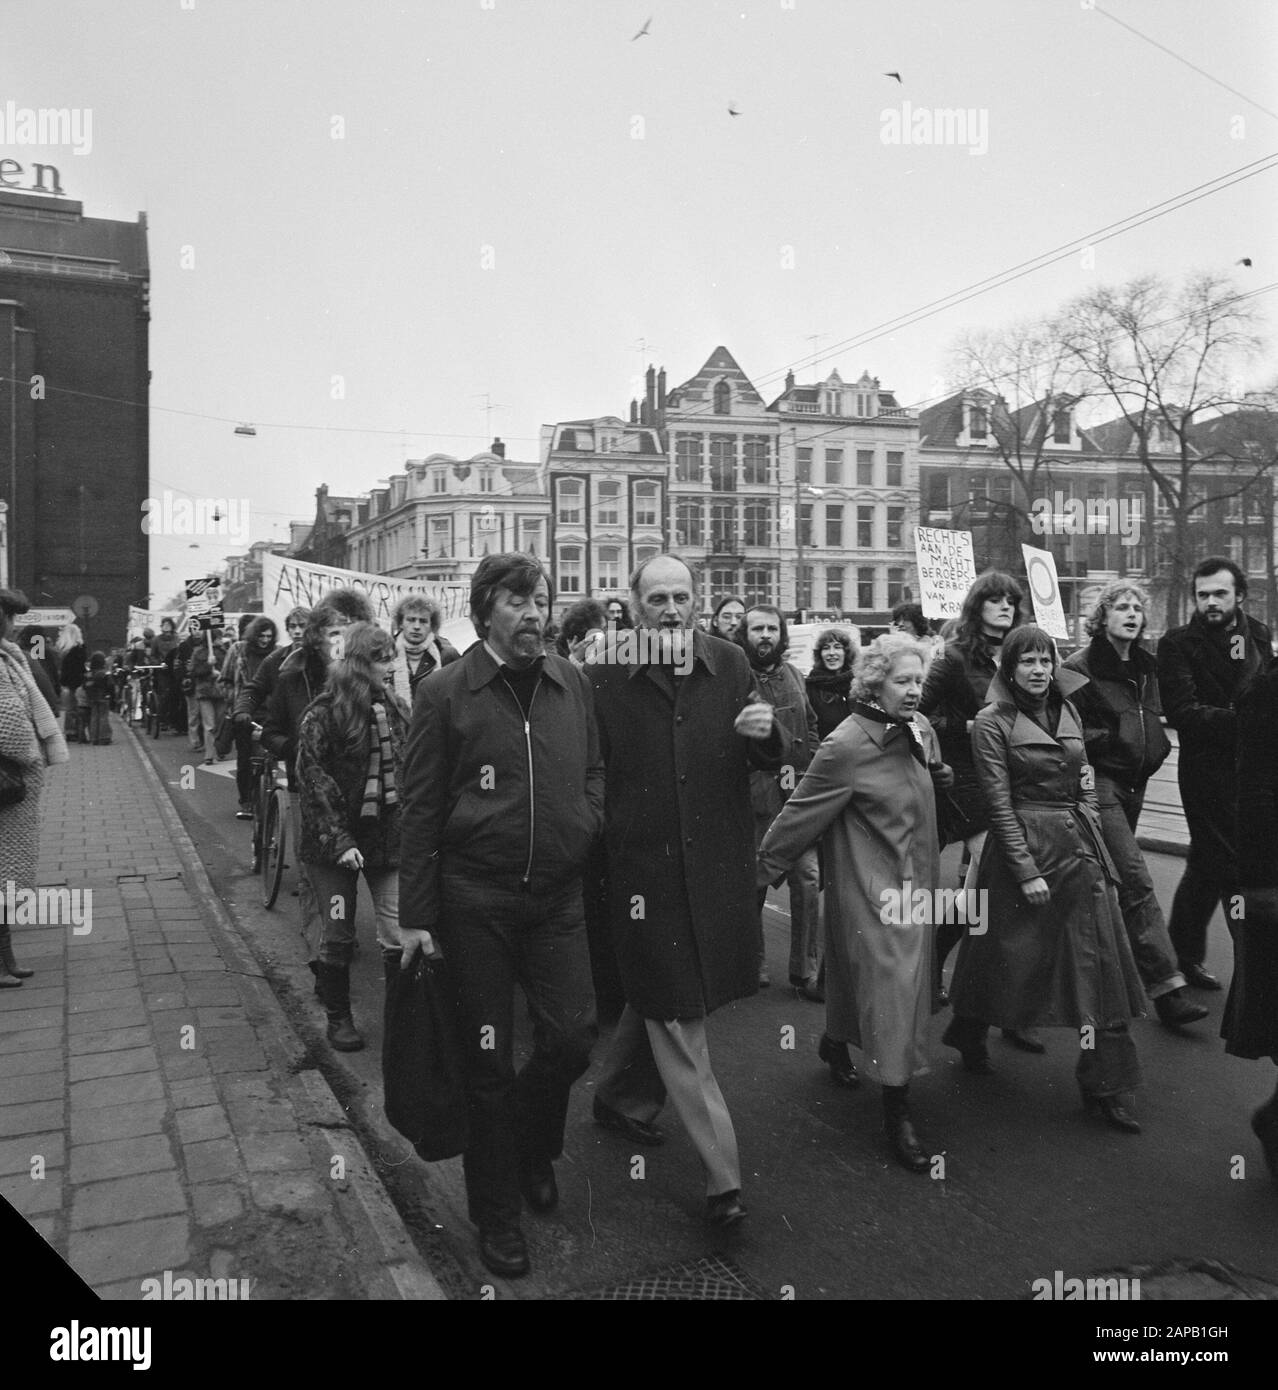 Demonstration against Occupational bids in the Netherlands in Amsterdam Rotterdam H. I. Kalma between the protesters Date: 21 January 1978 Location: Amsterdam, Noord-Holland Keywords: demonstrations Personal name: H. I. Kalma Stock Photo